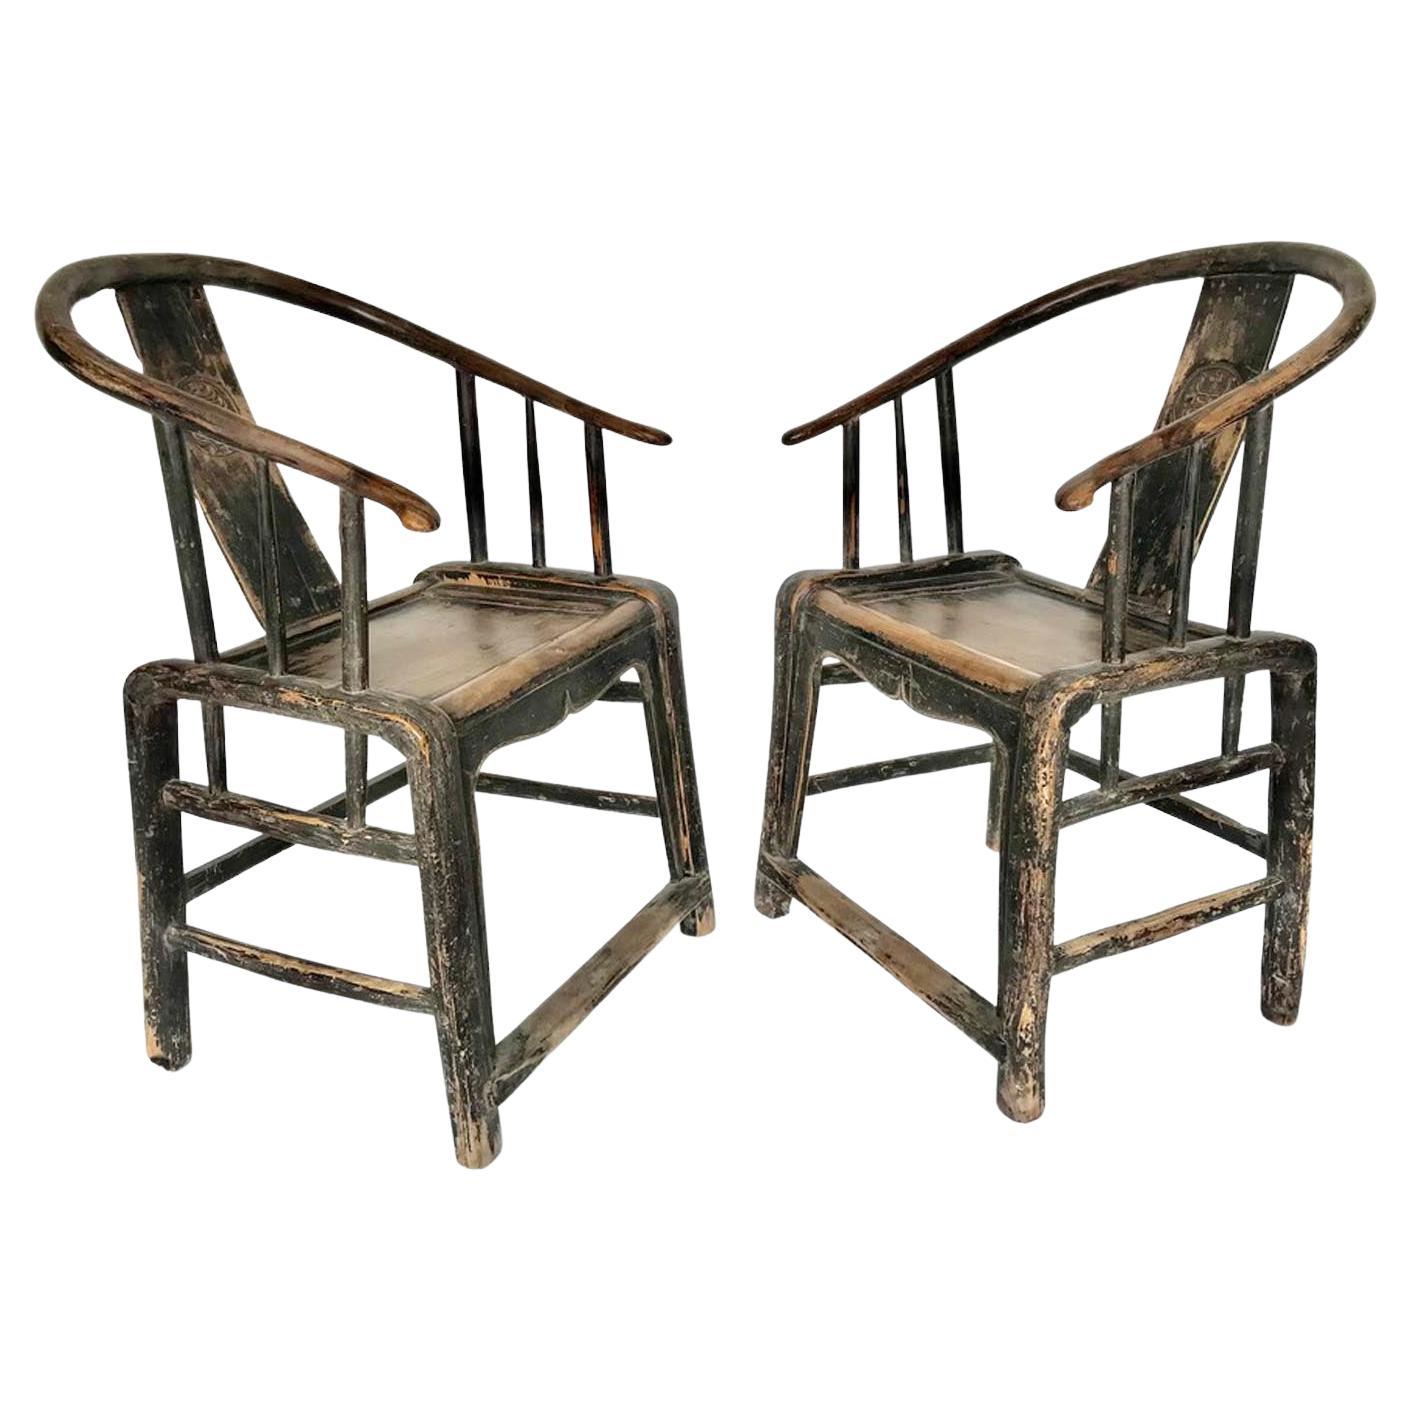 Pair of Graceful Early 19th Century Quing Dynasty Chairs